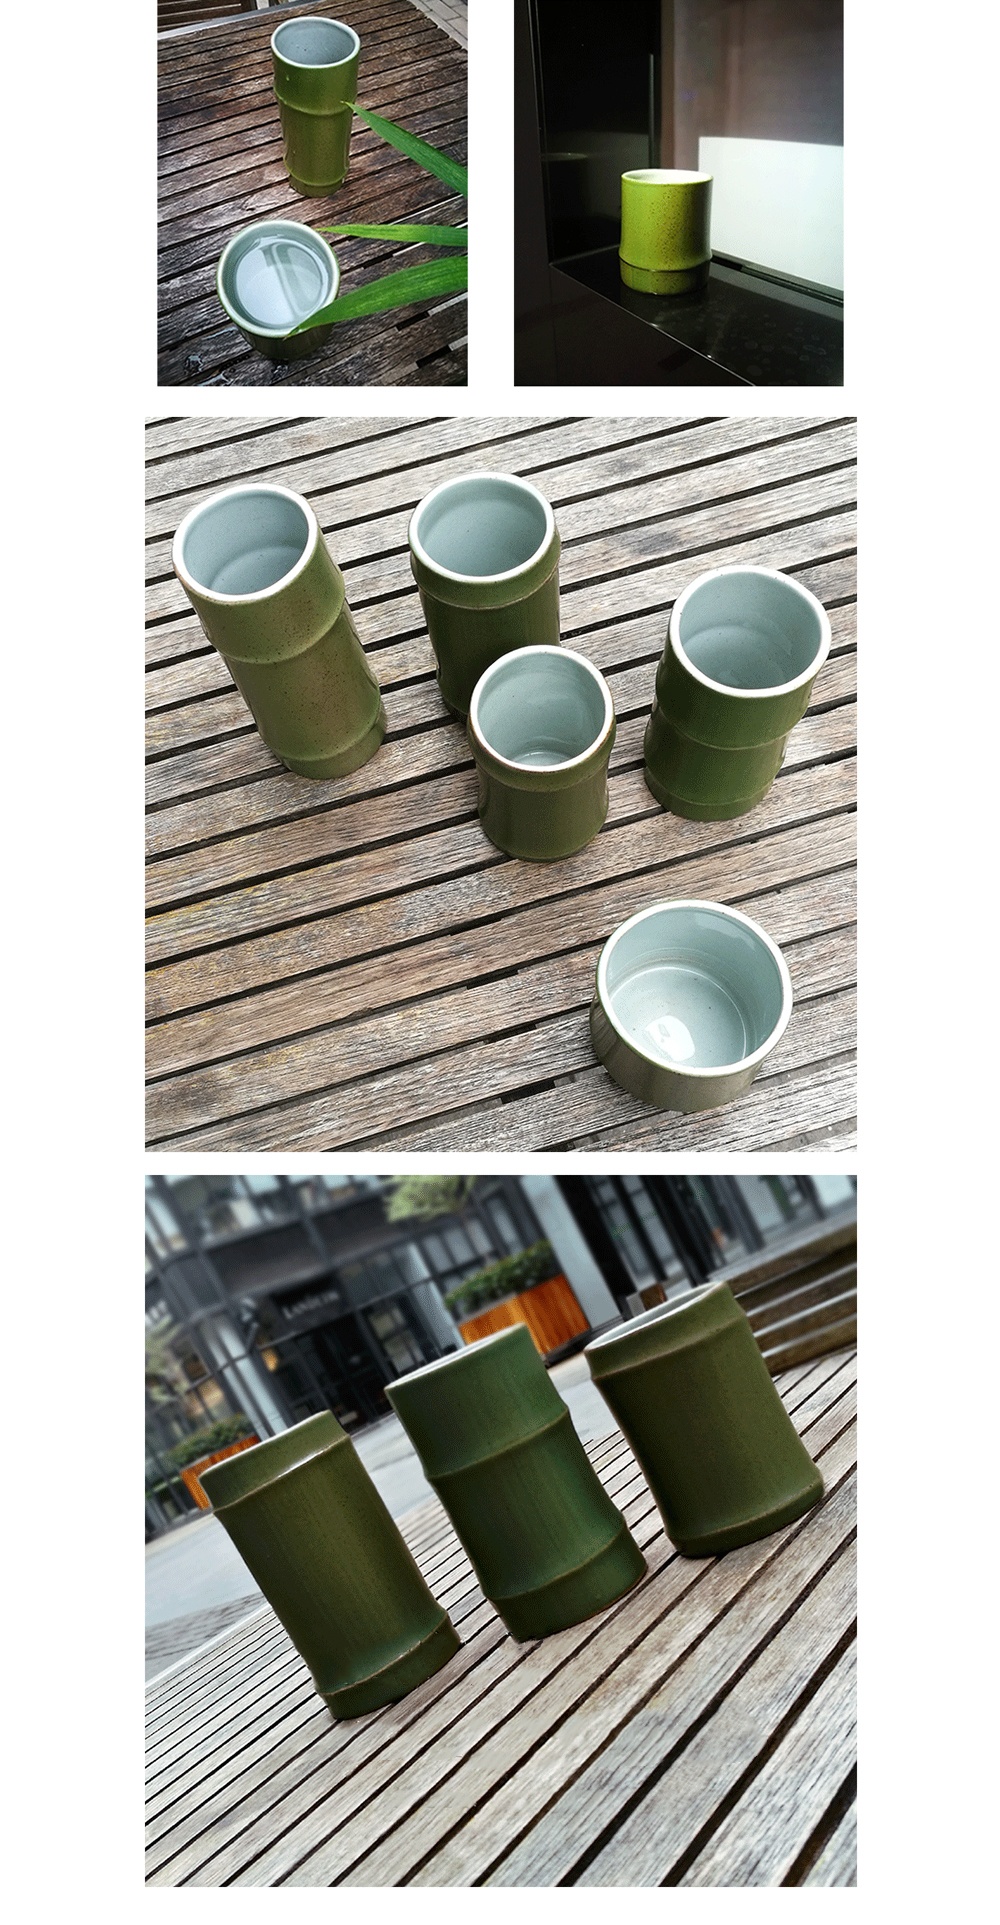 https://rs.apolloboxassets.com/images/sku1764-Bamboo-Shaped-Cup/Detail_4.jpg